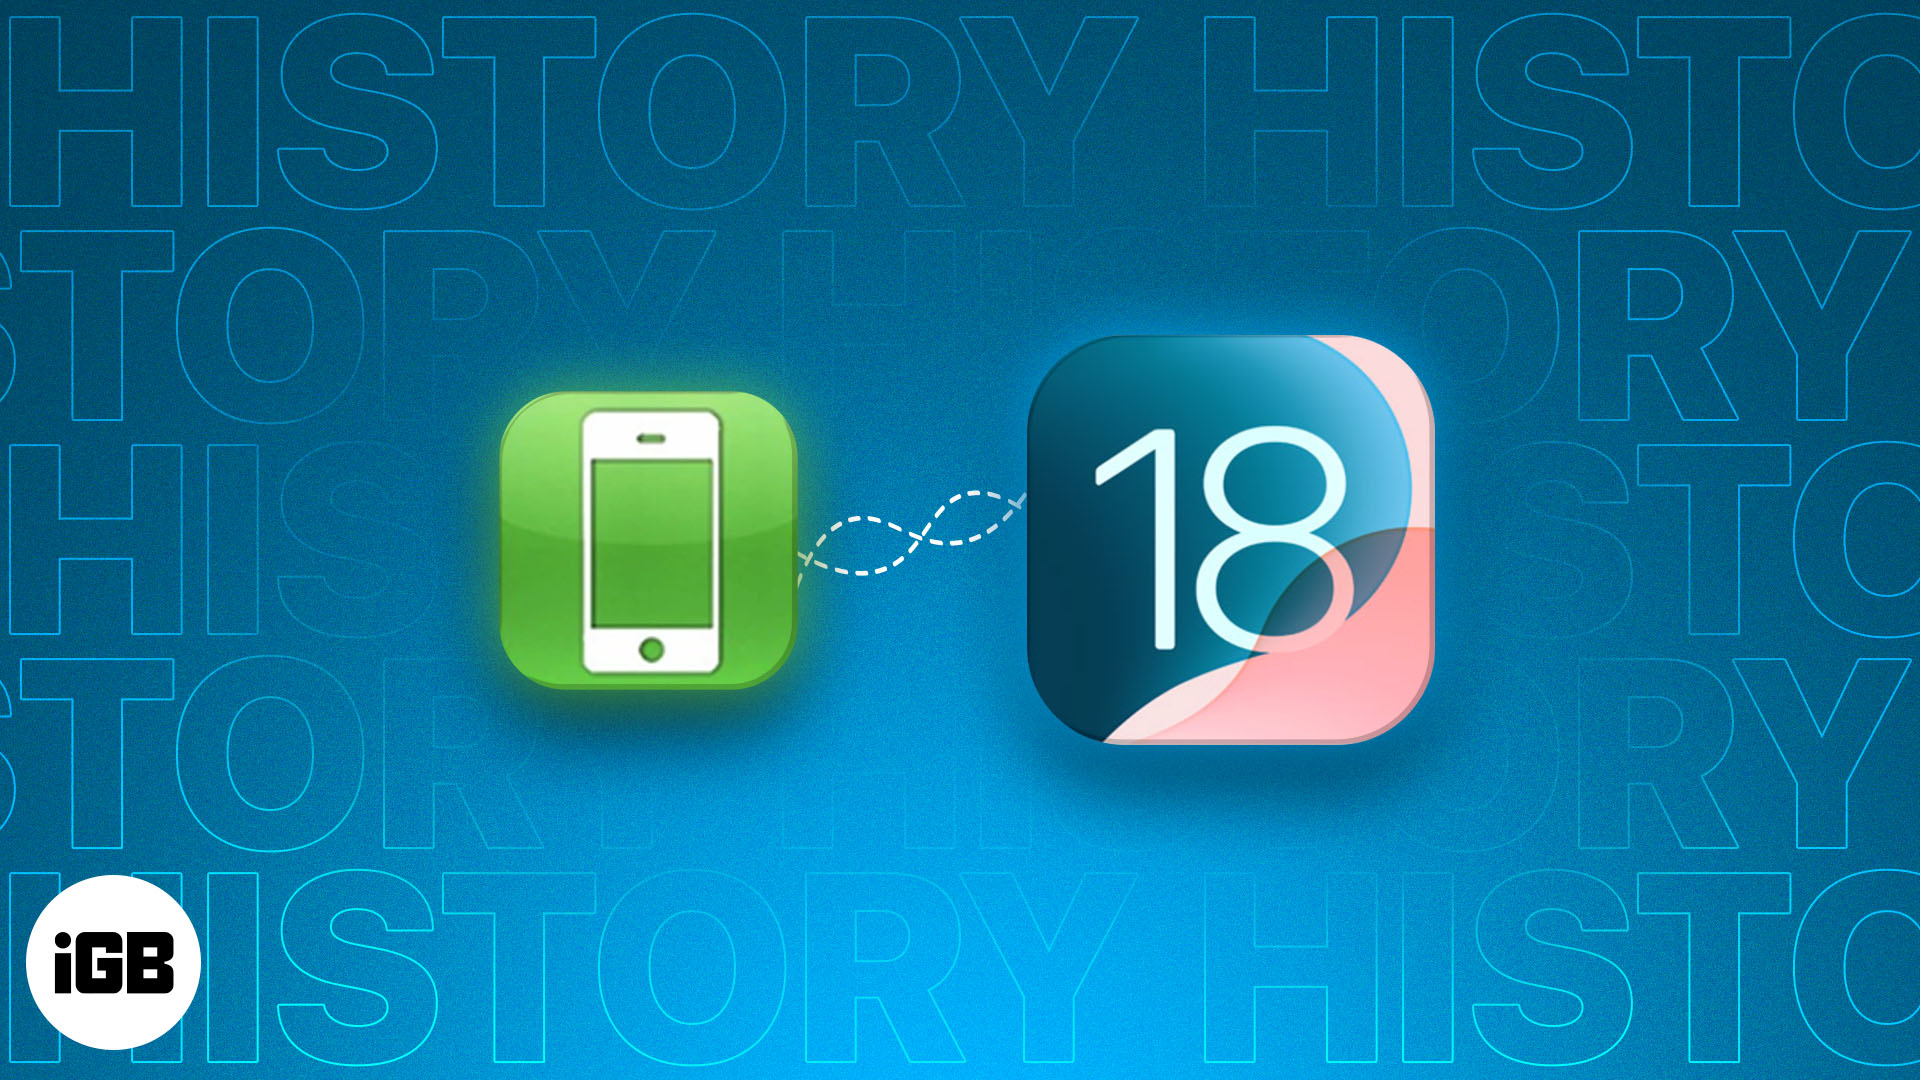 iPhone OS 1 to iOS 18 – A brief history of the iPhone software